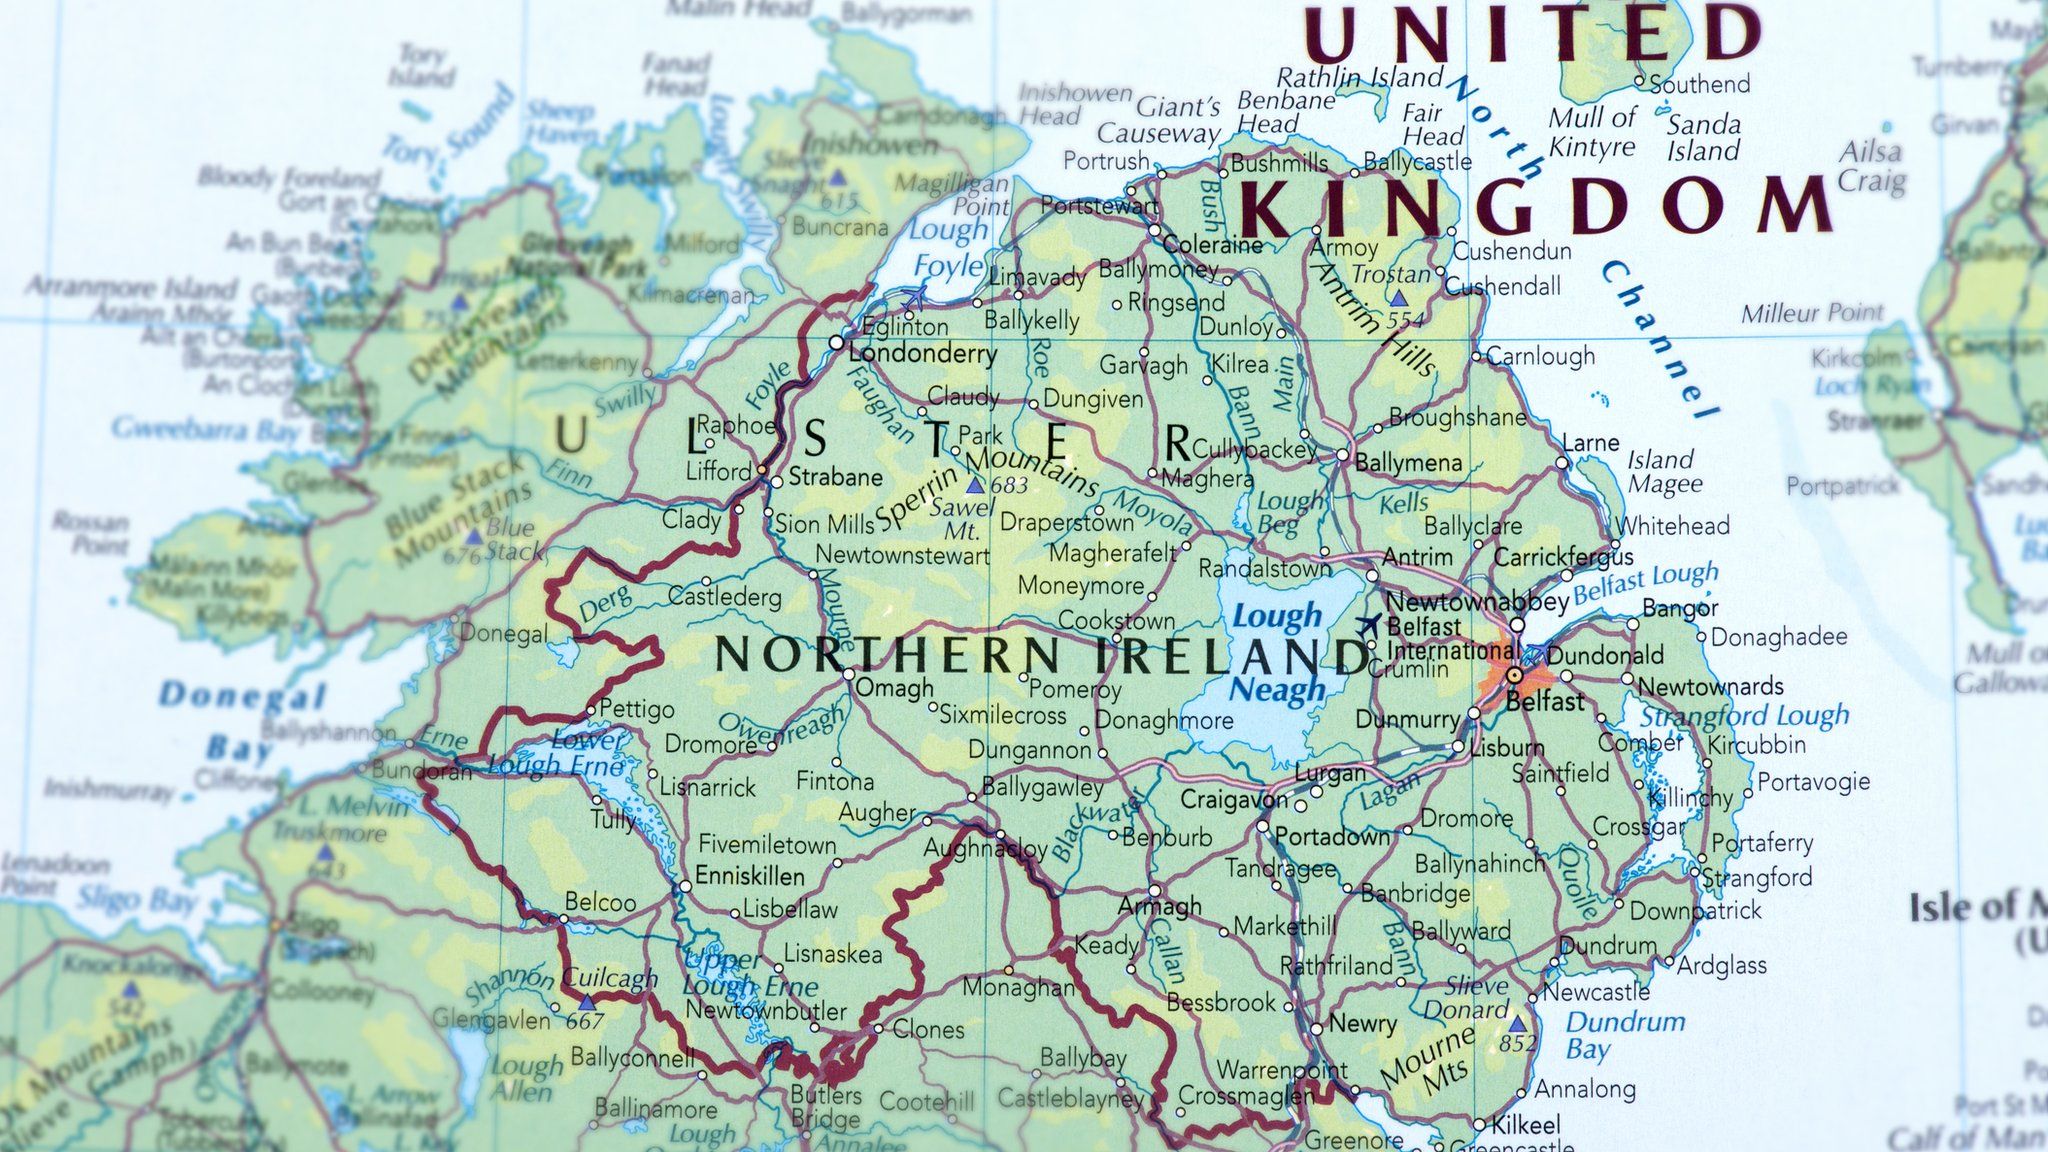 The Irish border marked with a red line